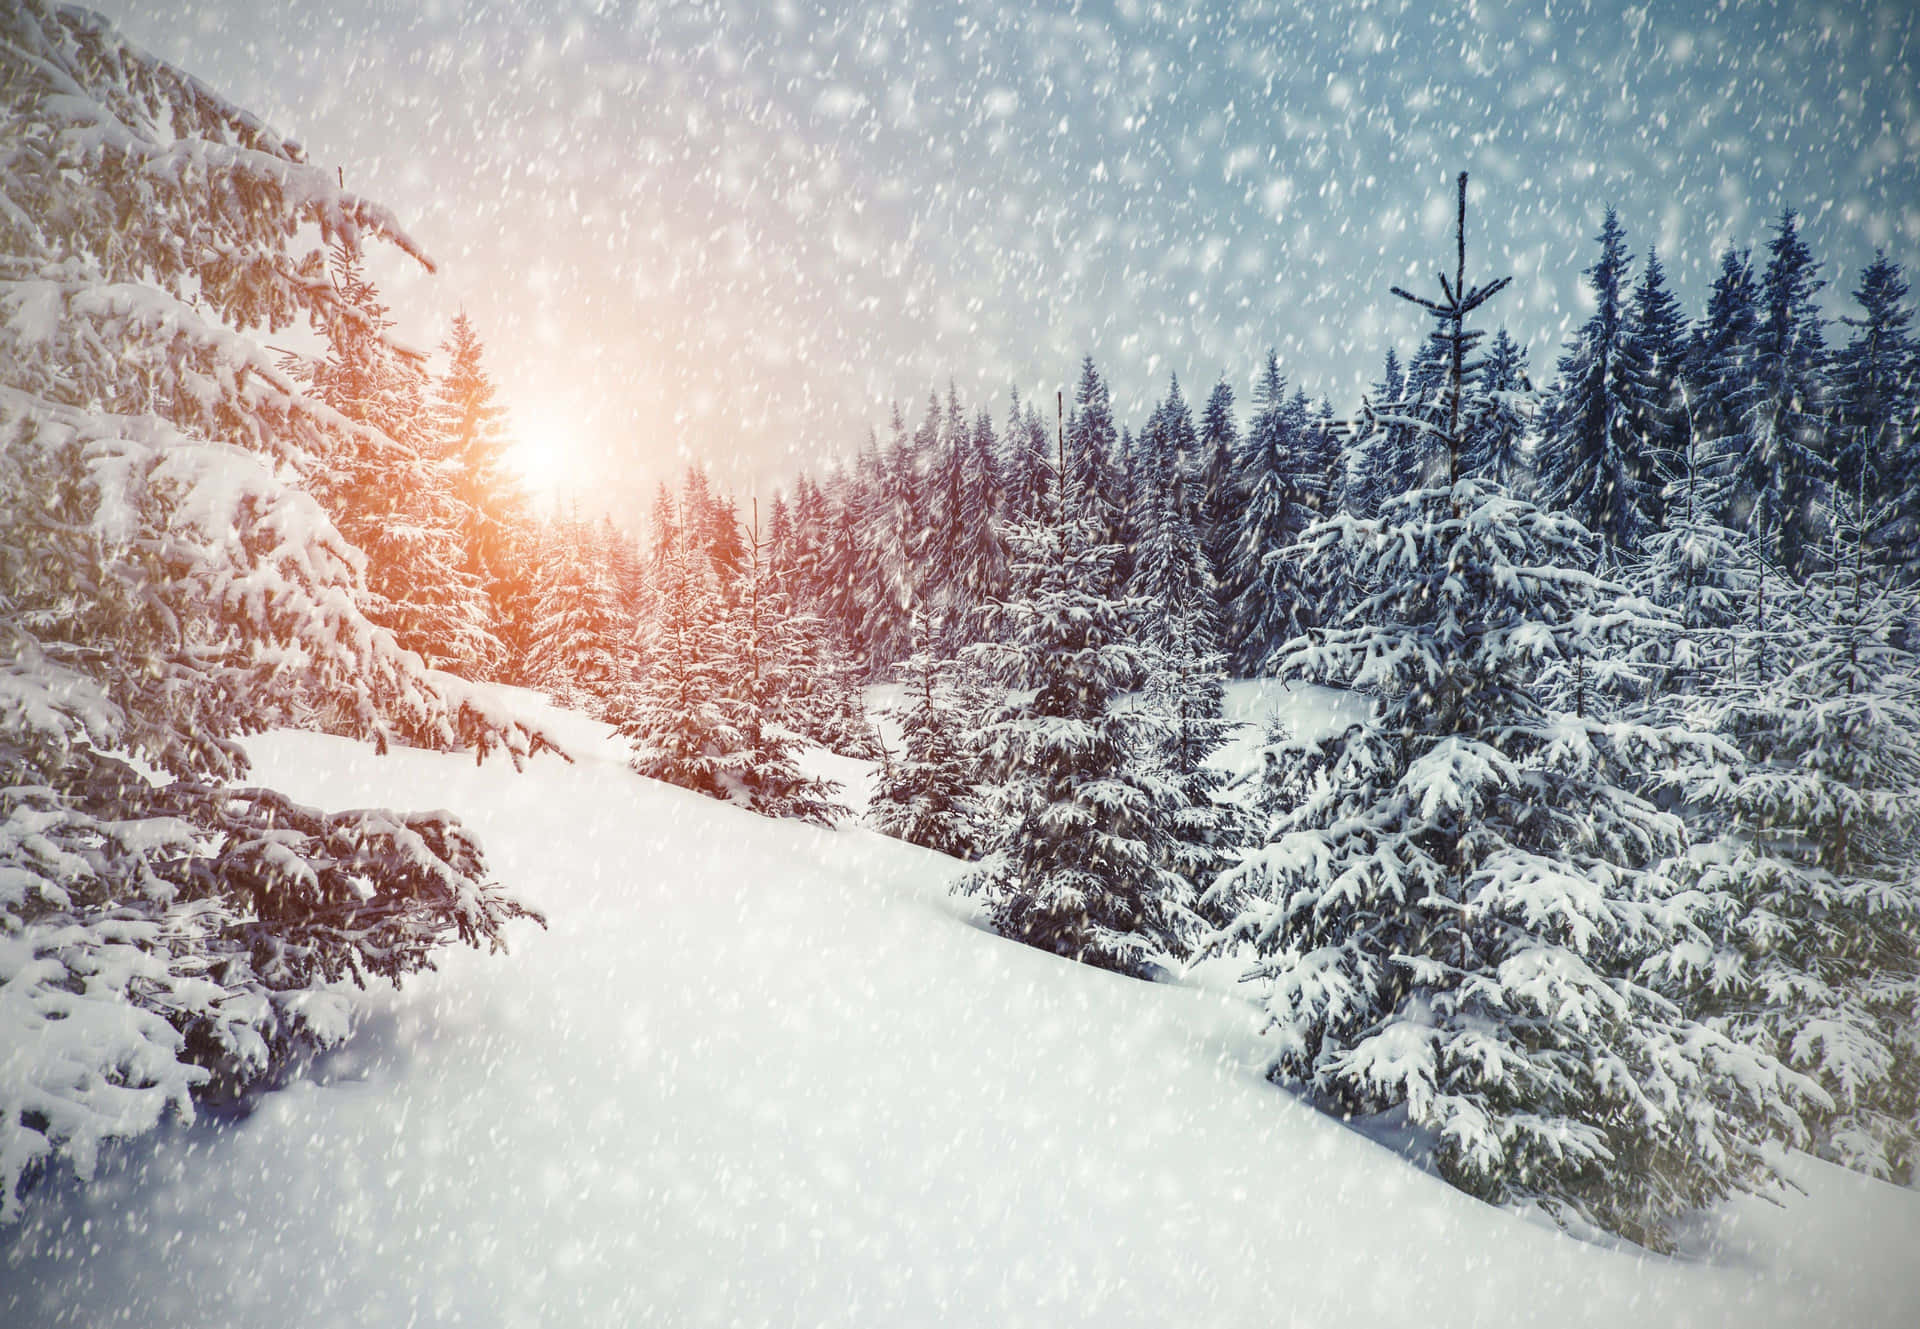 "The snow is sparkling in the winter sun" Wallpaper